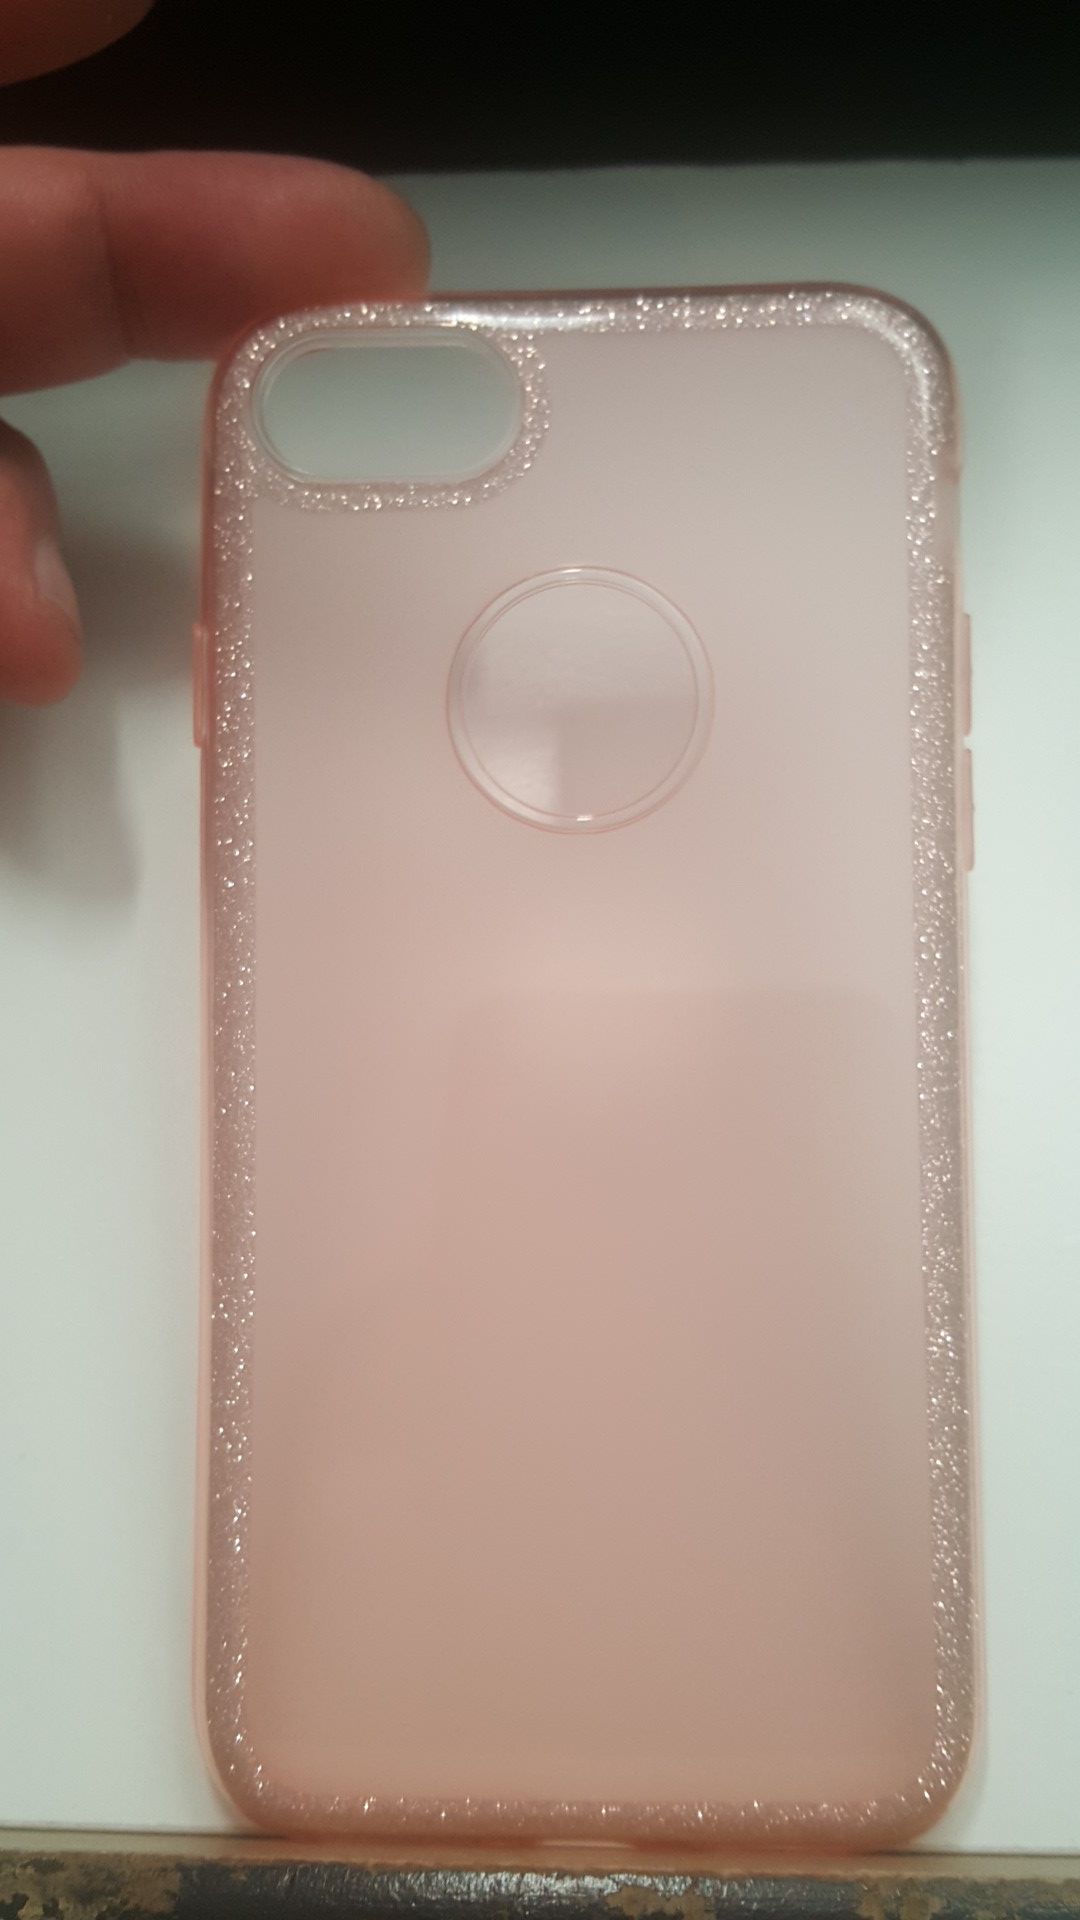 Case for iphone 7/8 4.7" not plus pink glitter new 7firm shiping only